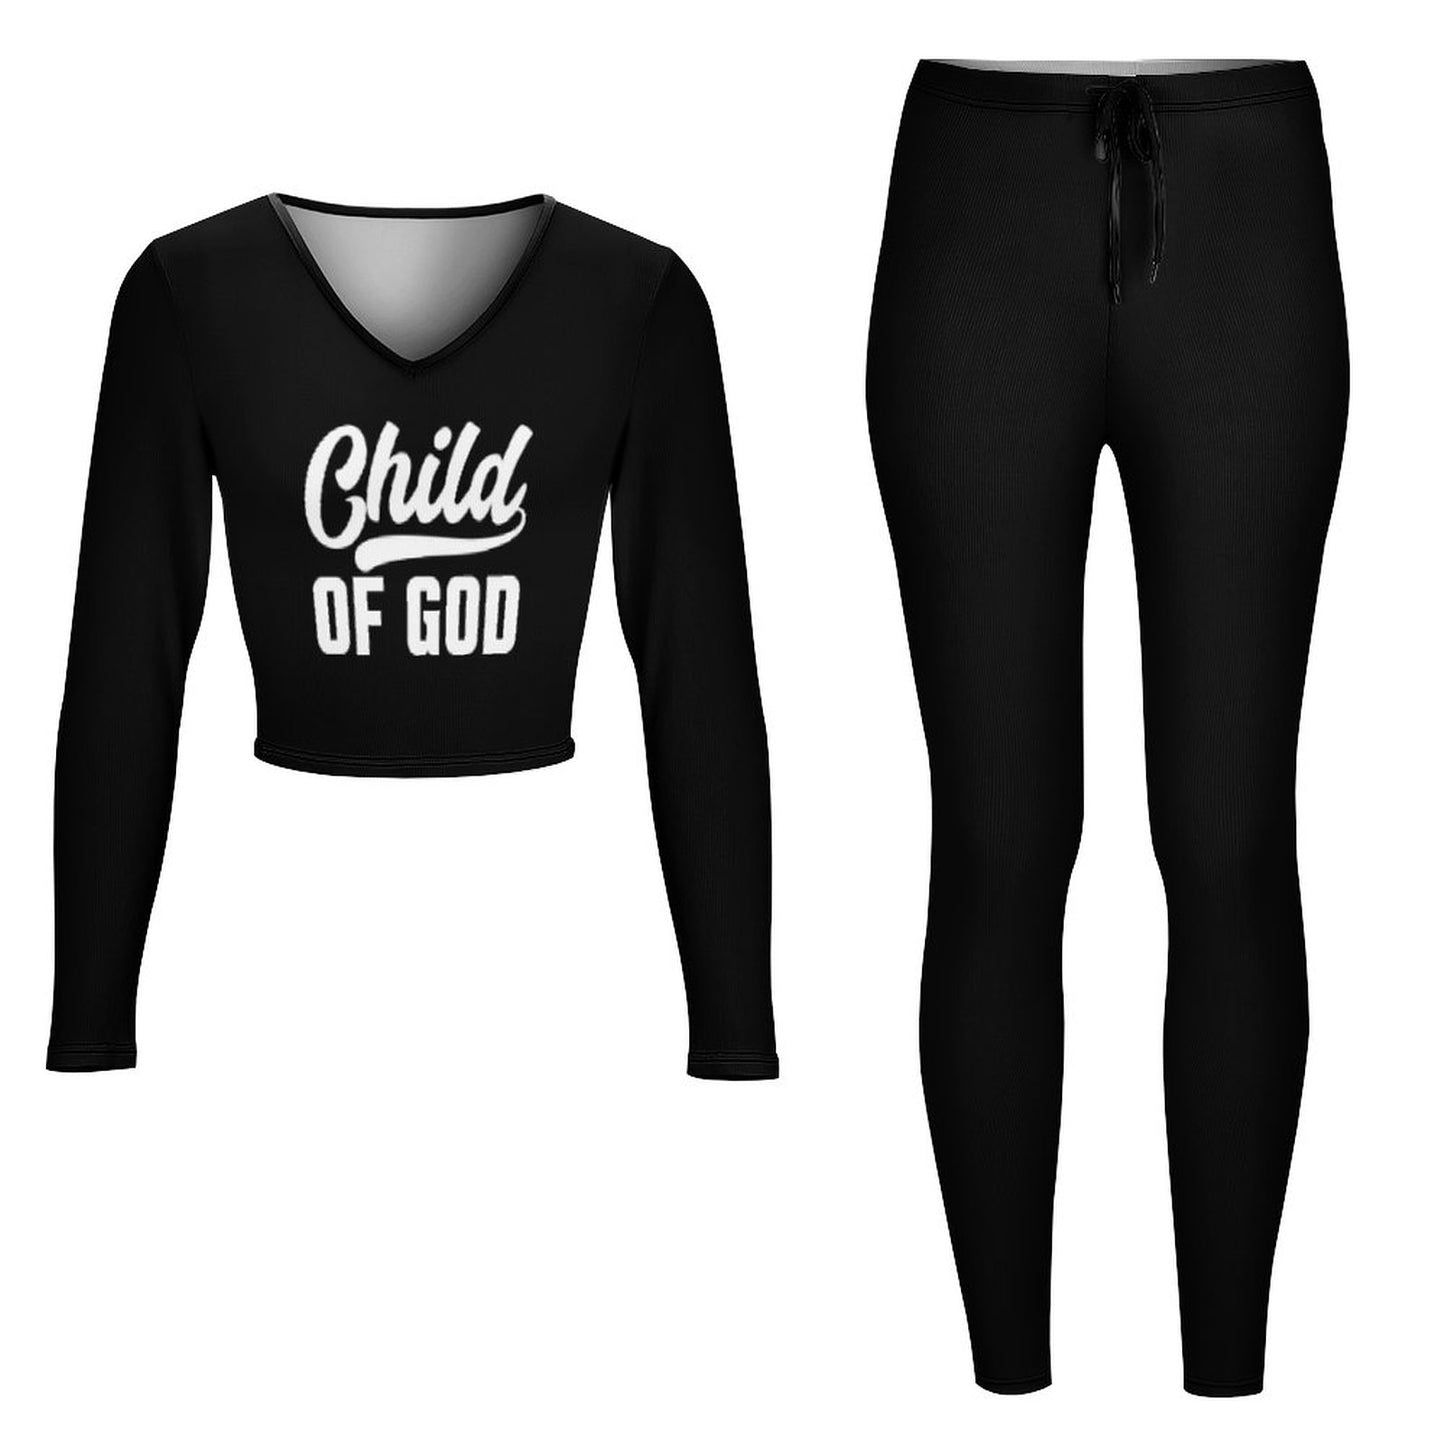 Child Of God Women's Christian Casual Outfit V neck Sweatshirt Set  SALE-Personal Design